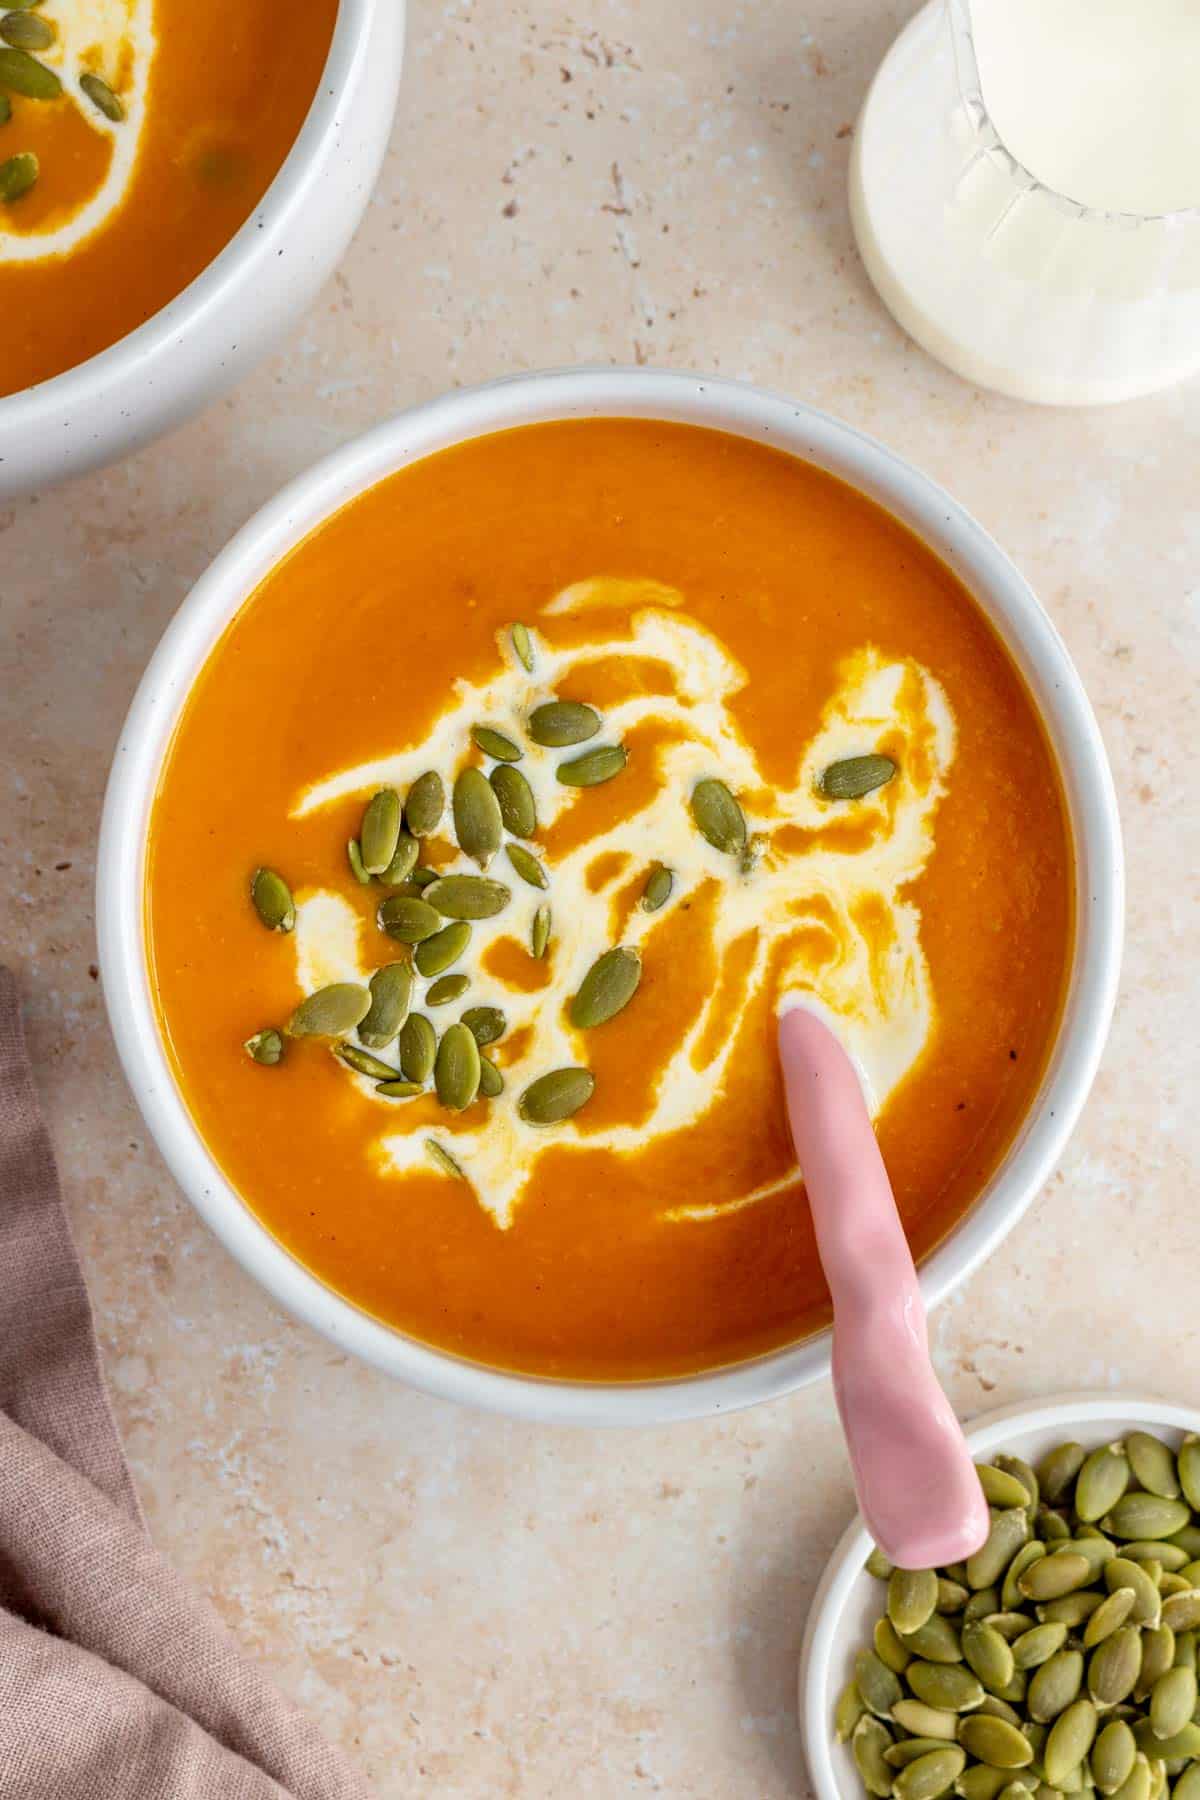 Overhead view of a bowl of sweet potato and pumpkin soup garnished with coconut milk and pumpkin seeds. A spoon in the soup.